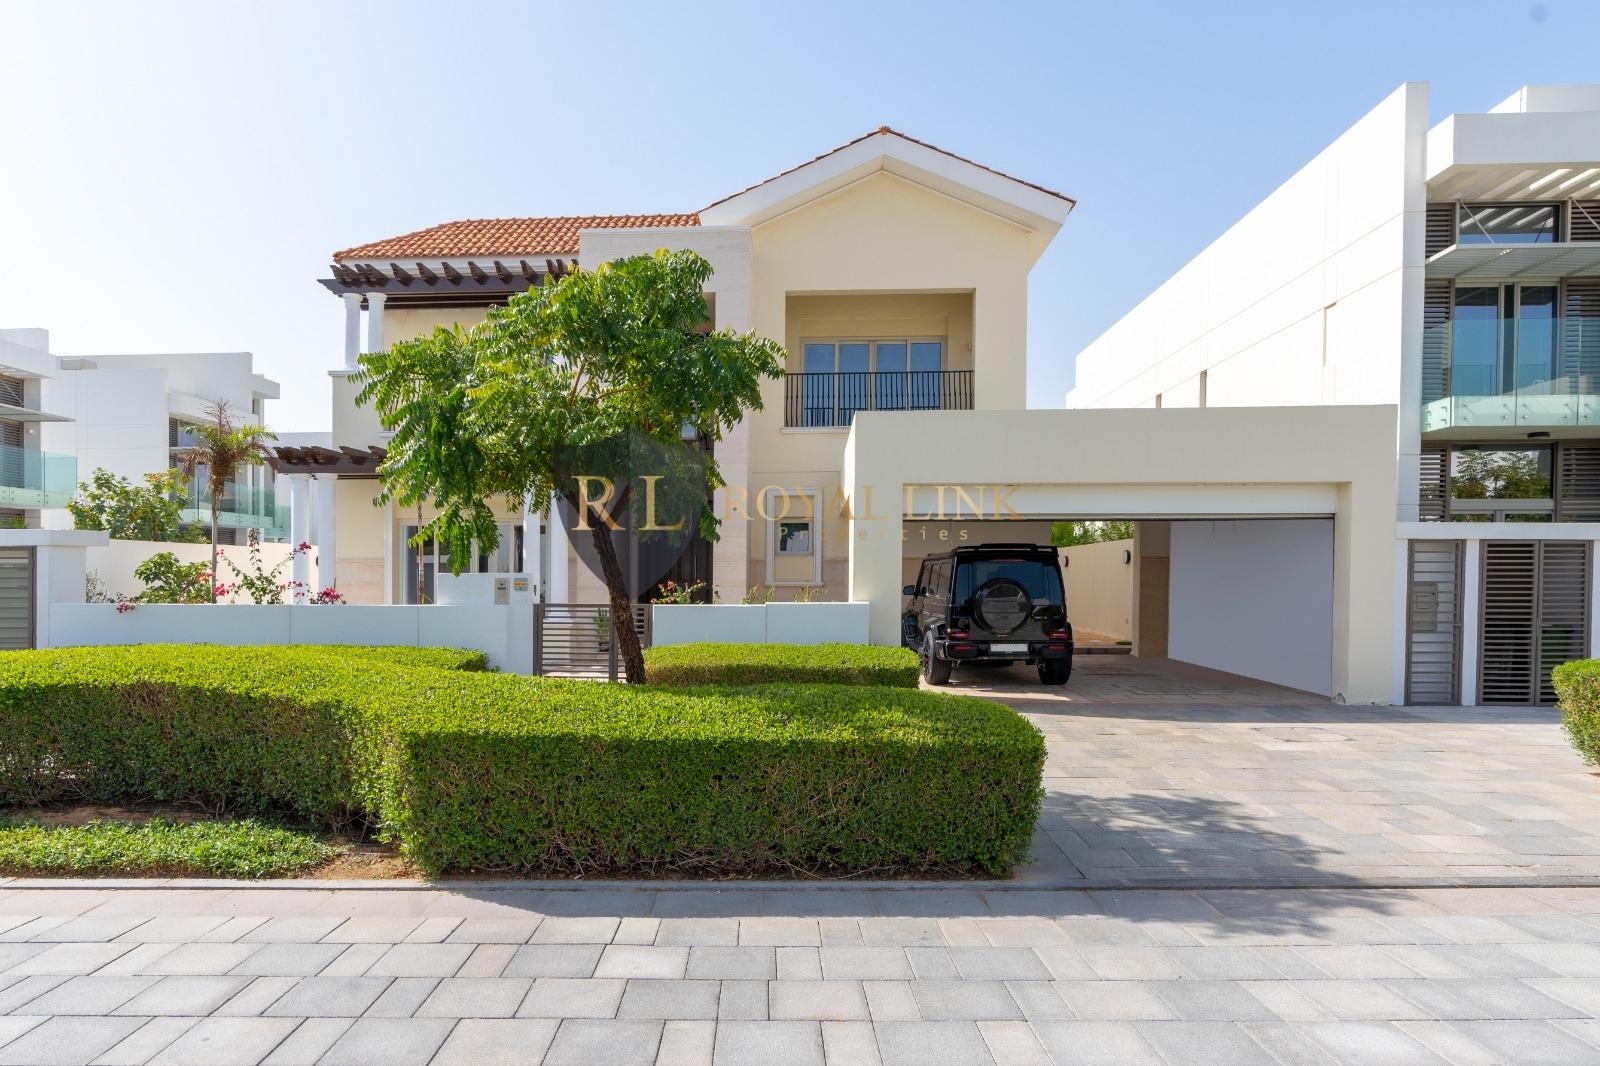 4 bed, 6 bath Villa for sale in The Residences at District One, Mohammed Bin Rashid City, Dubai for price AED 19500000 